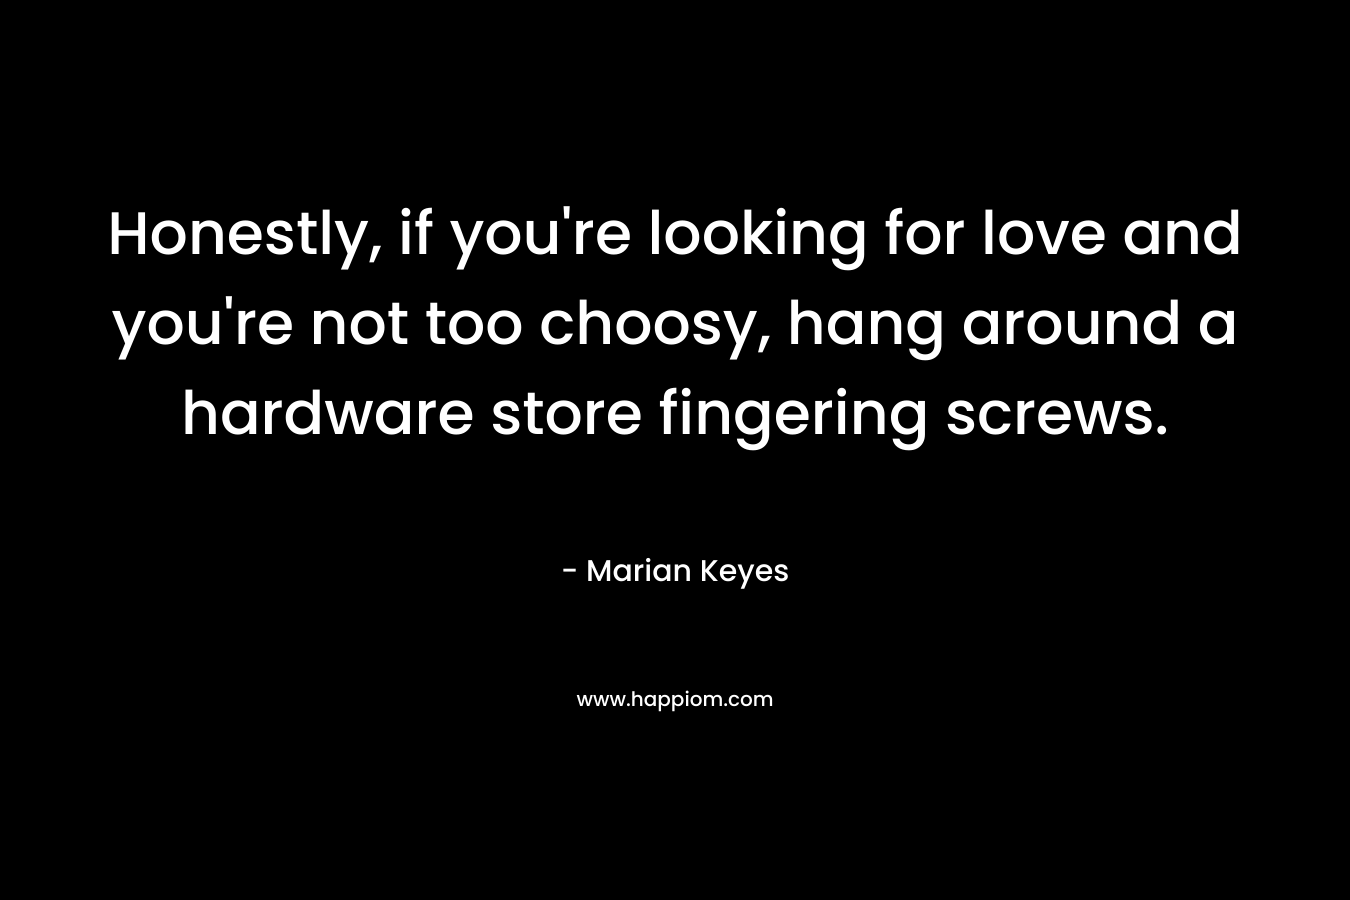 Honestly, if you’re looking for love and you’re not too choosy, hang around a hardware store fingering screws. – Marian Keyes